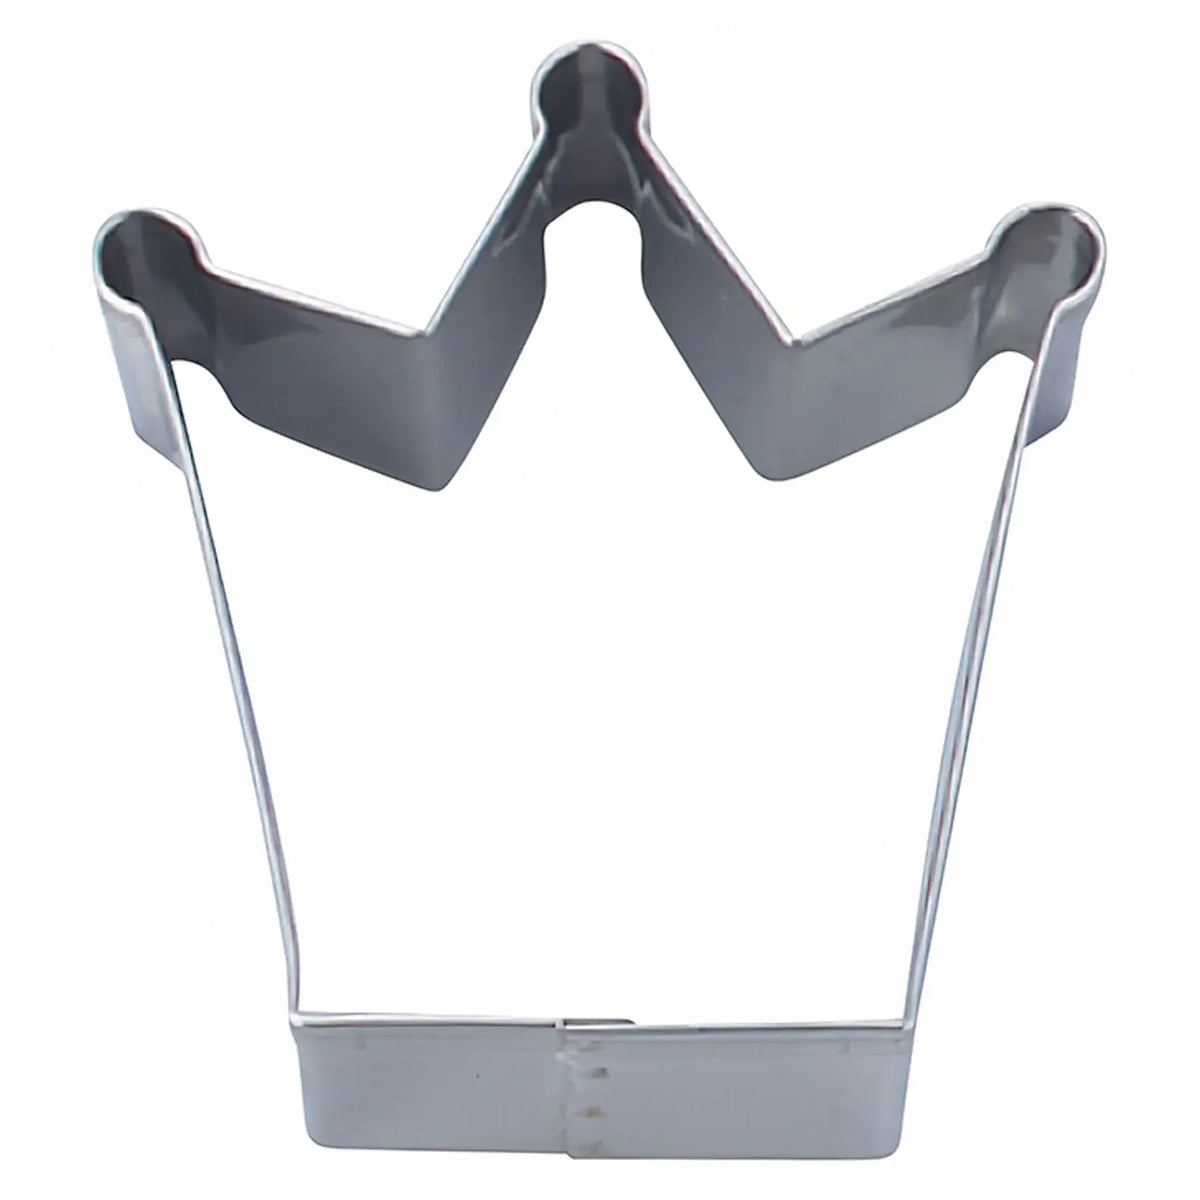 TIGERCROWN Cake Land Stainless Steel Cookie Cutter Crown